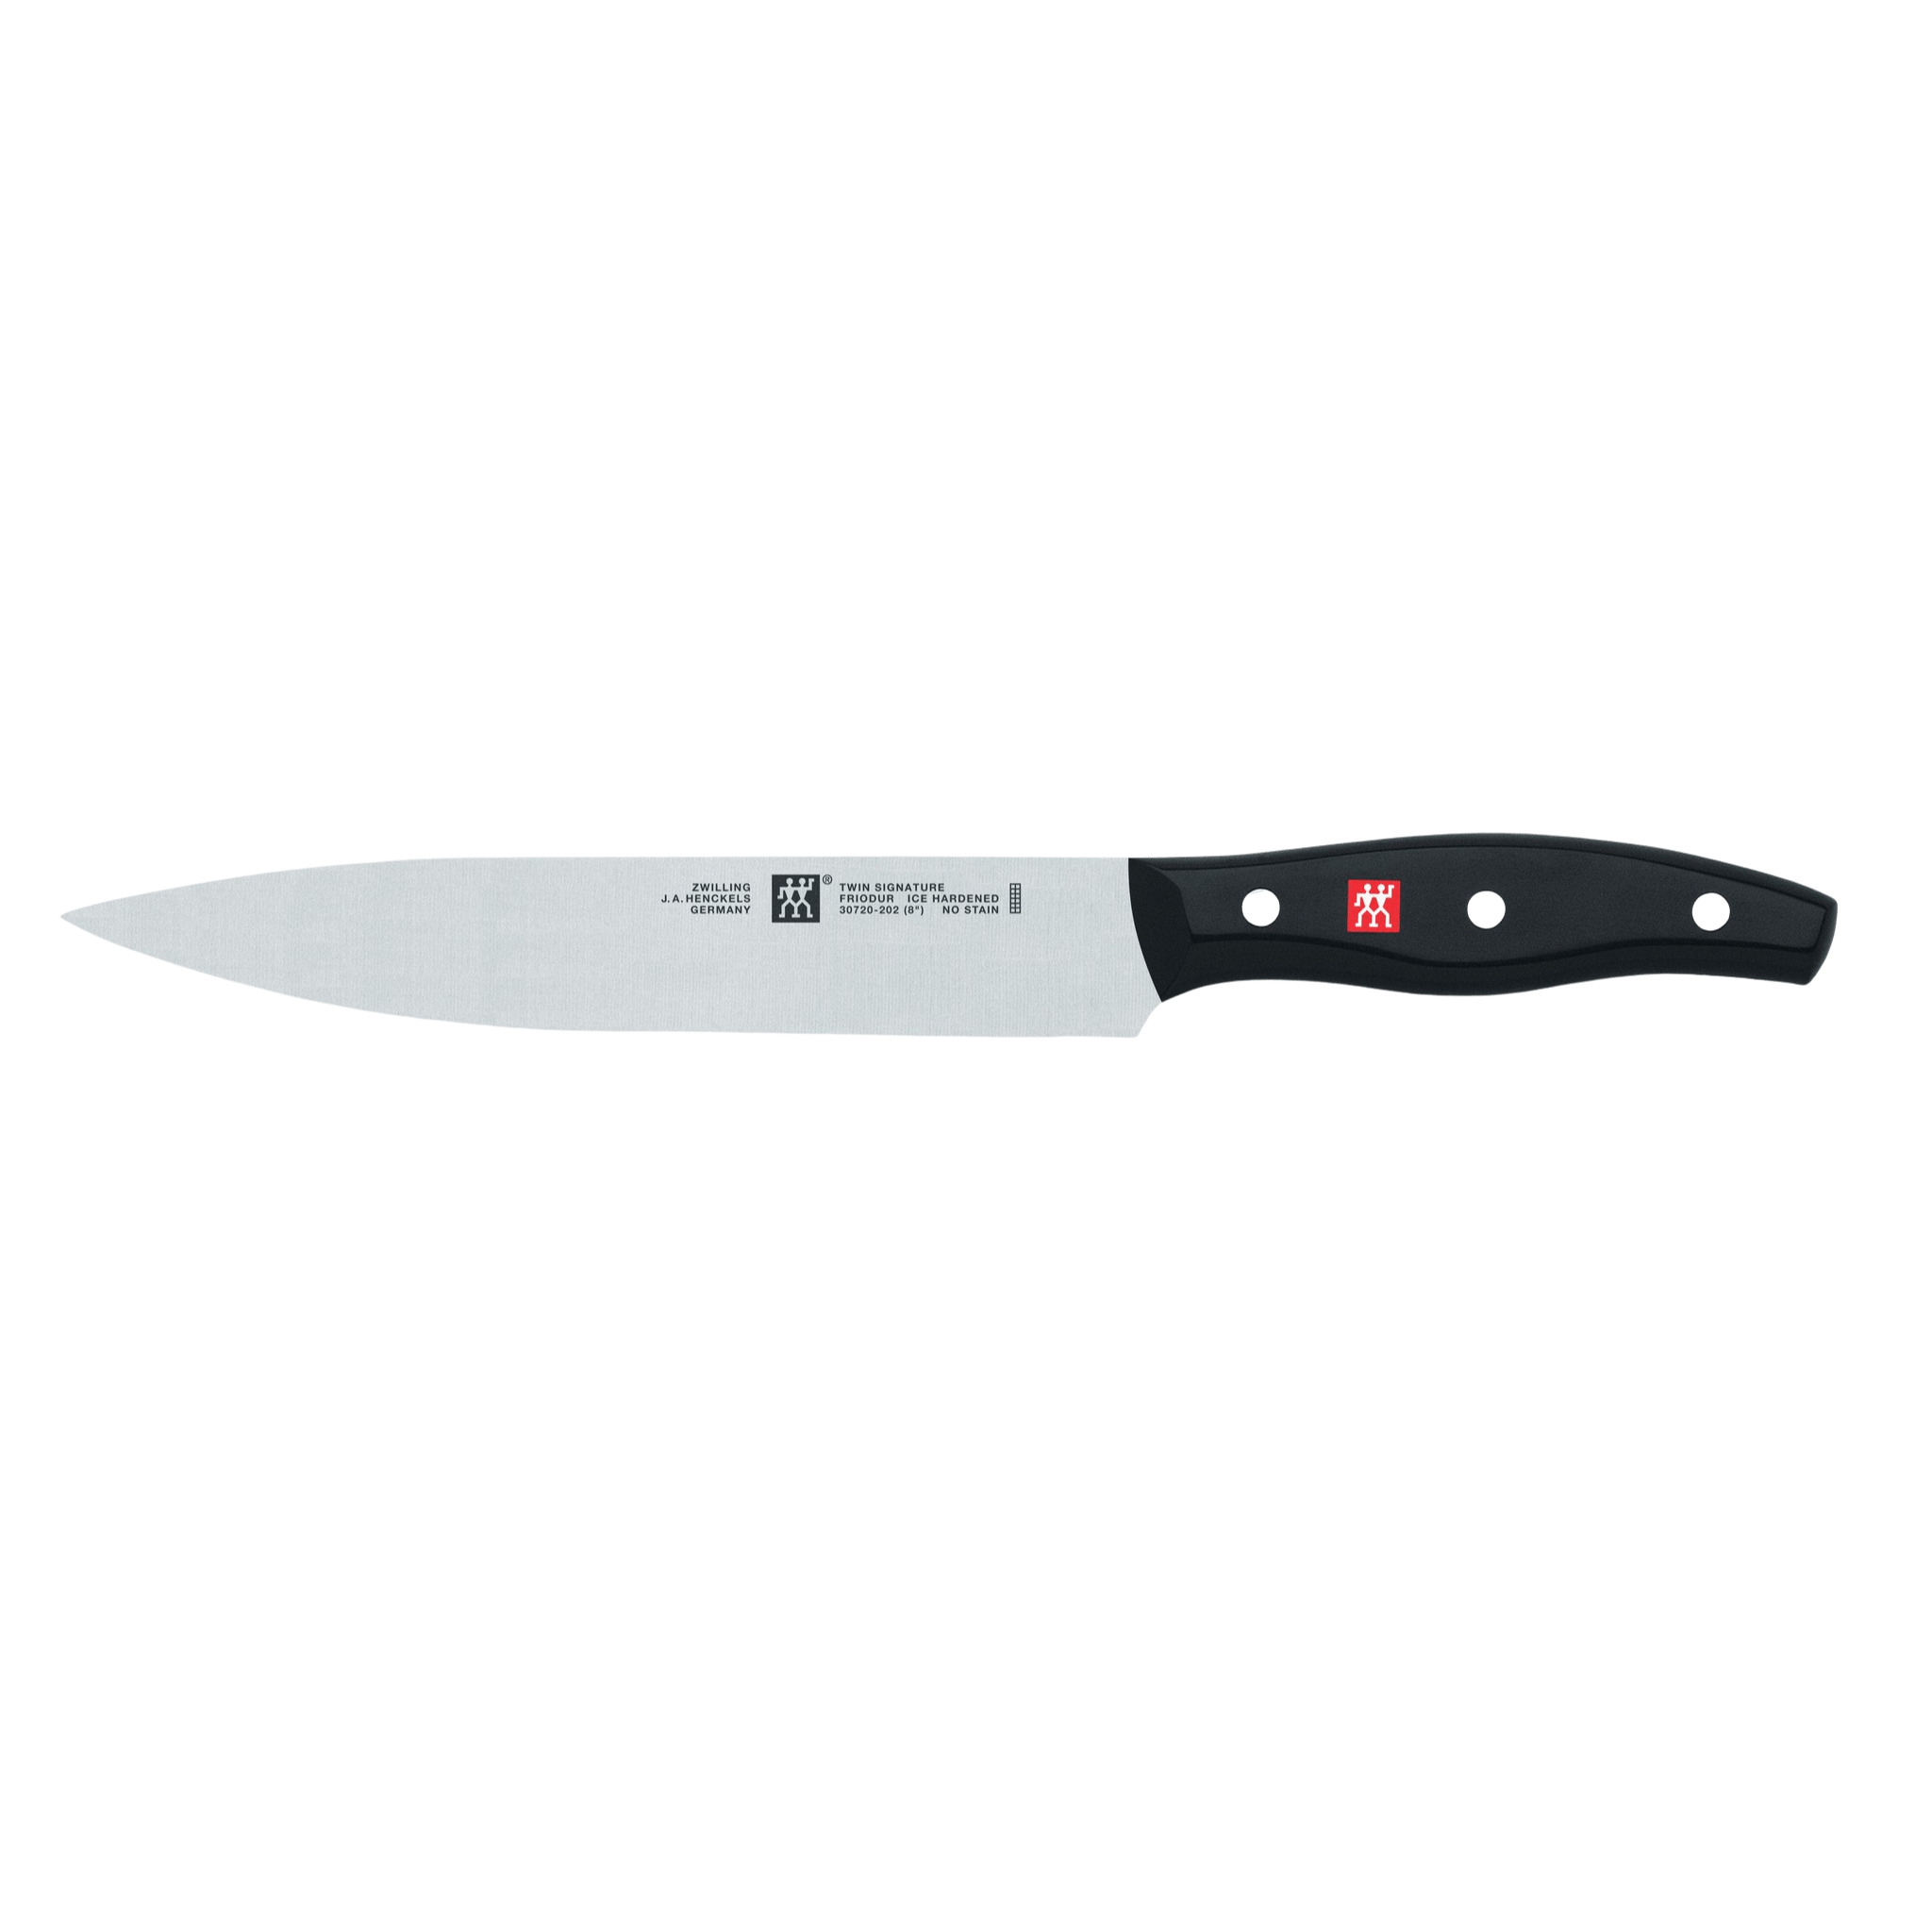 TWIN® Signature CARVING KNIFE 8" / 200 mm